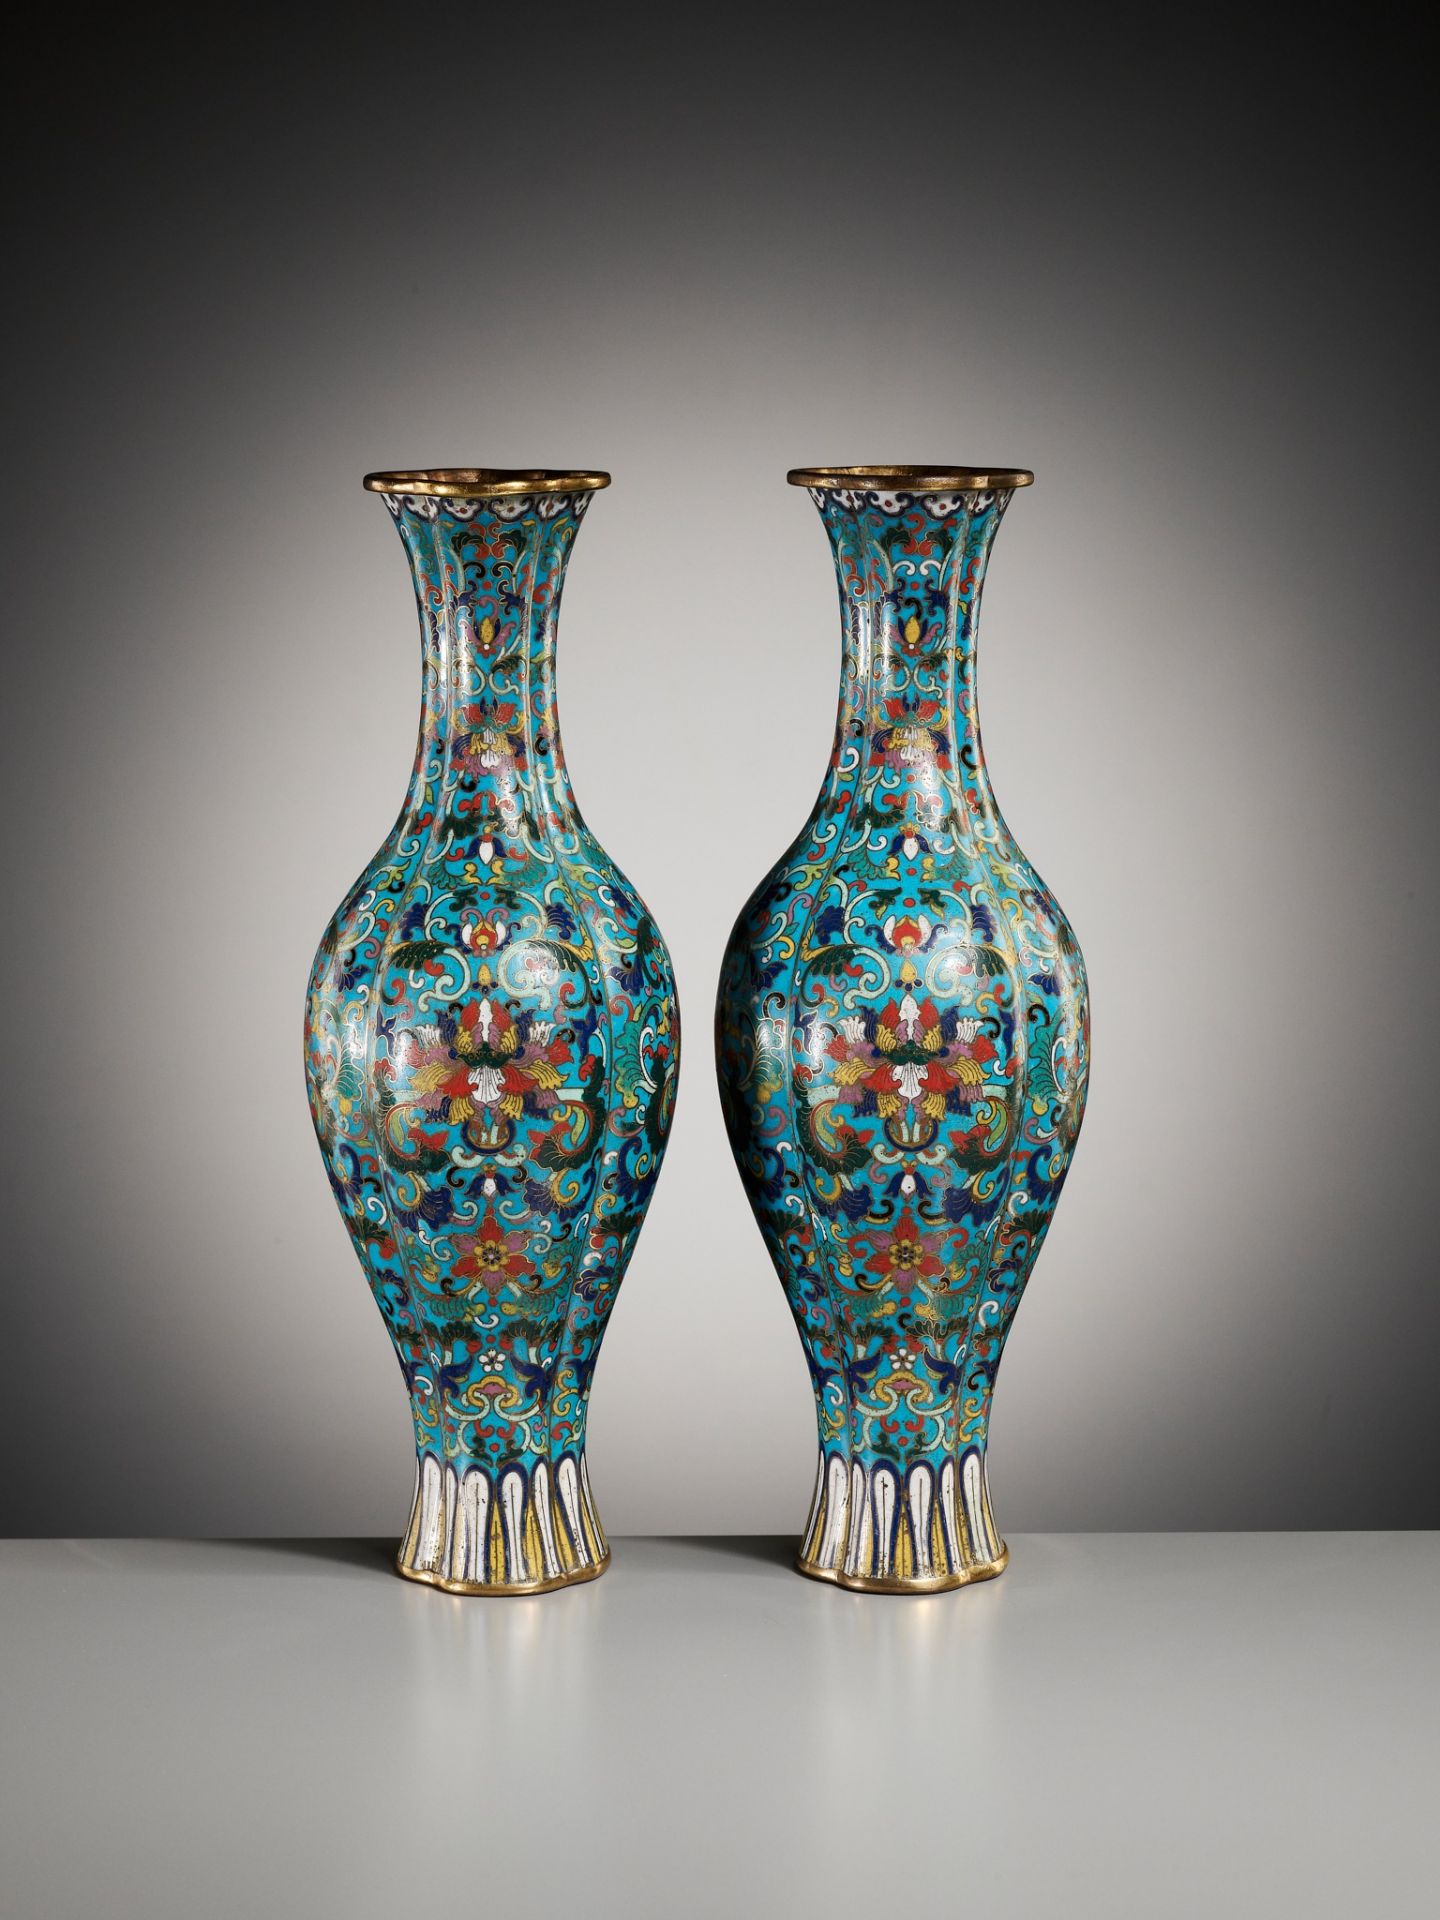 AN IMPERIAL PAIR OF QUADRILOBED CLOISONNÉ ENAMEL ‘LOTUS’ VASES, QIANLONG MARK AND OF THE PERIOD - Image 15 of 17